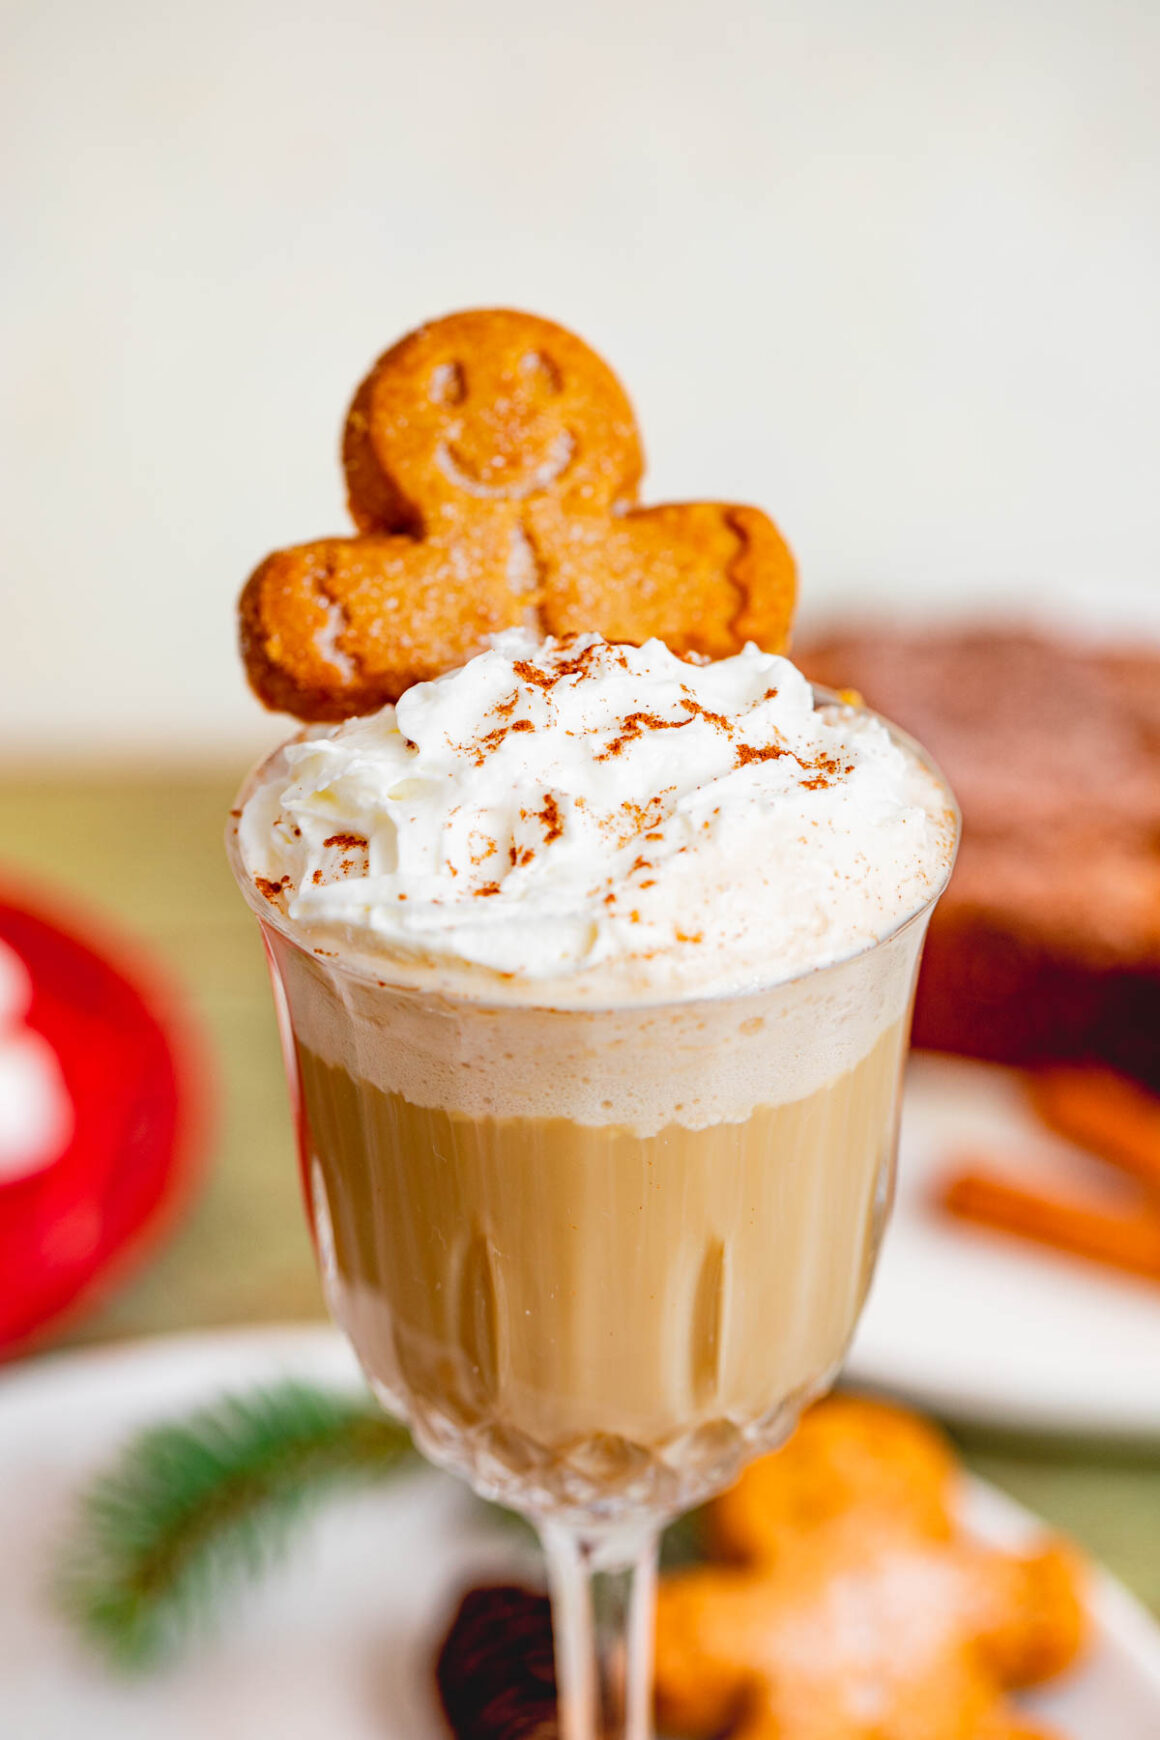 Gingerbread latte is a delicious and indulgent drink that combines the classic flavors of gingerbread with the smooth, creamy texture of a latte.